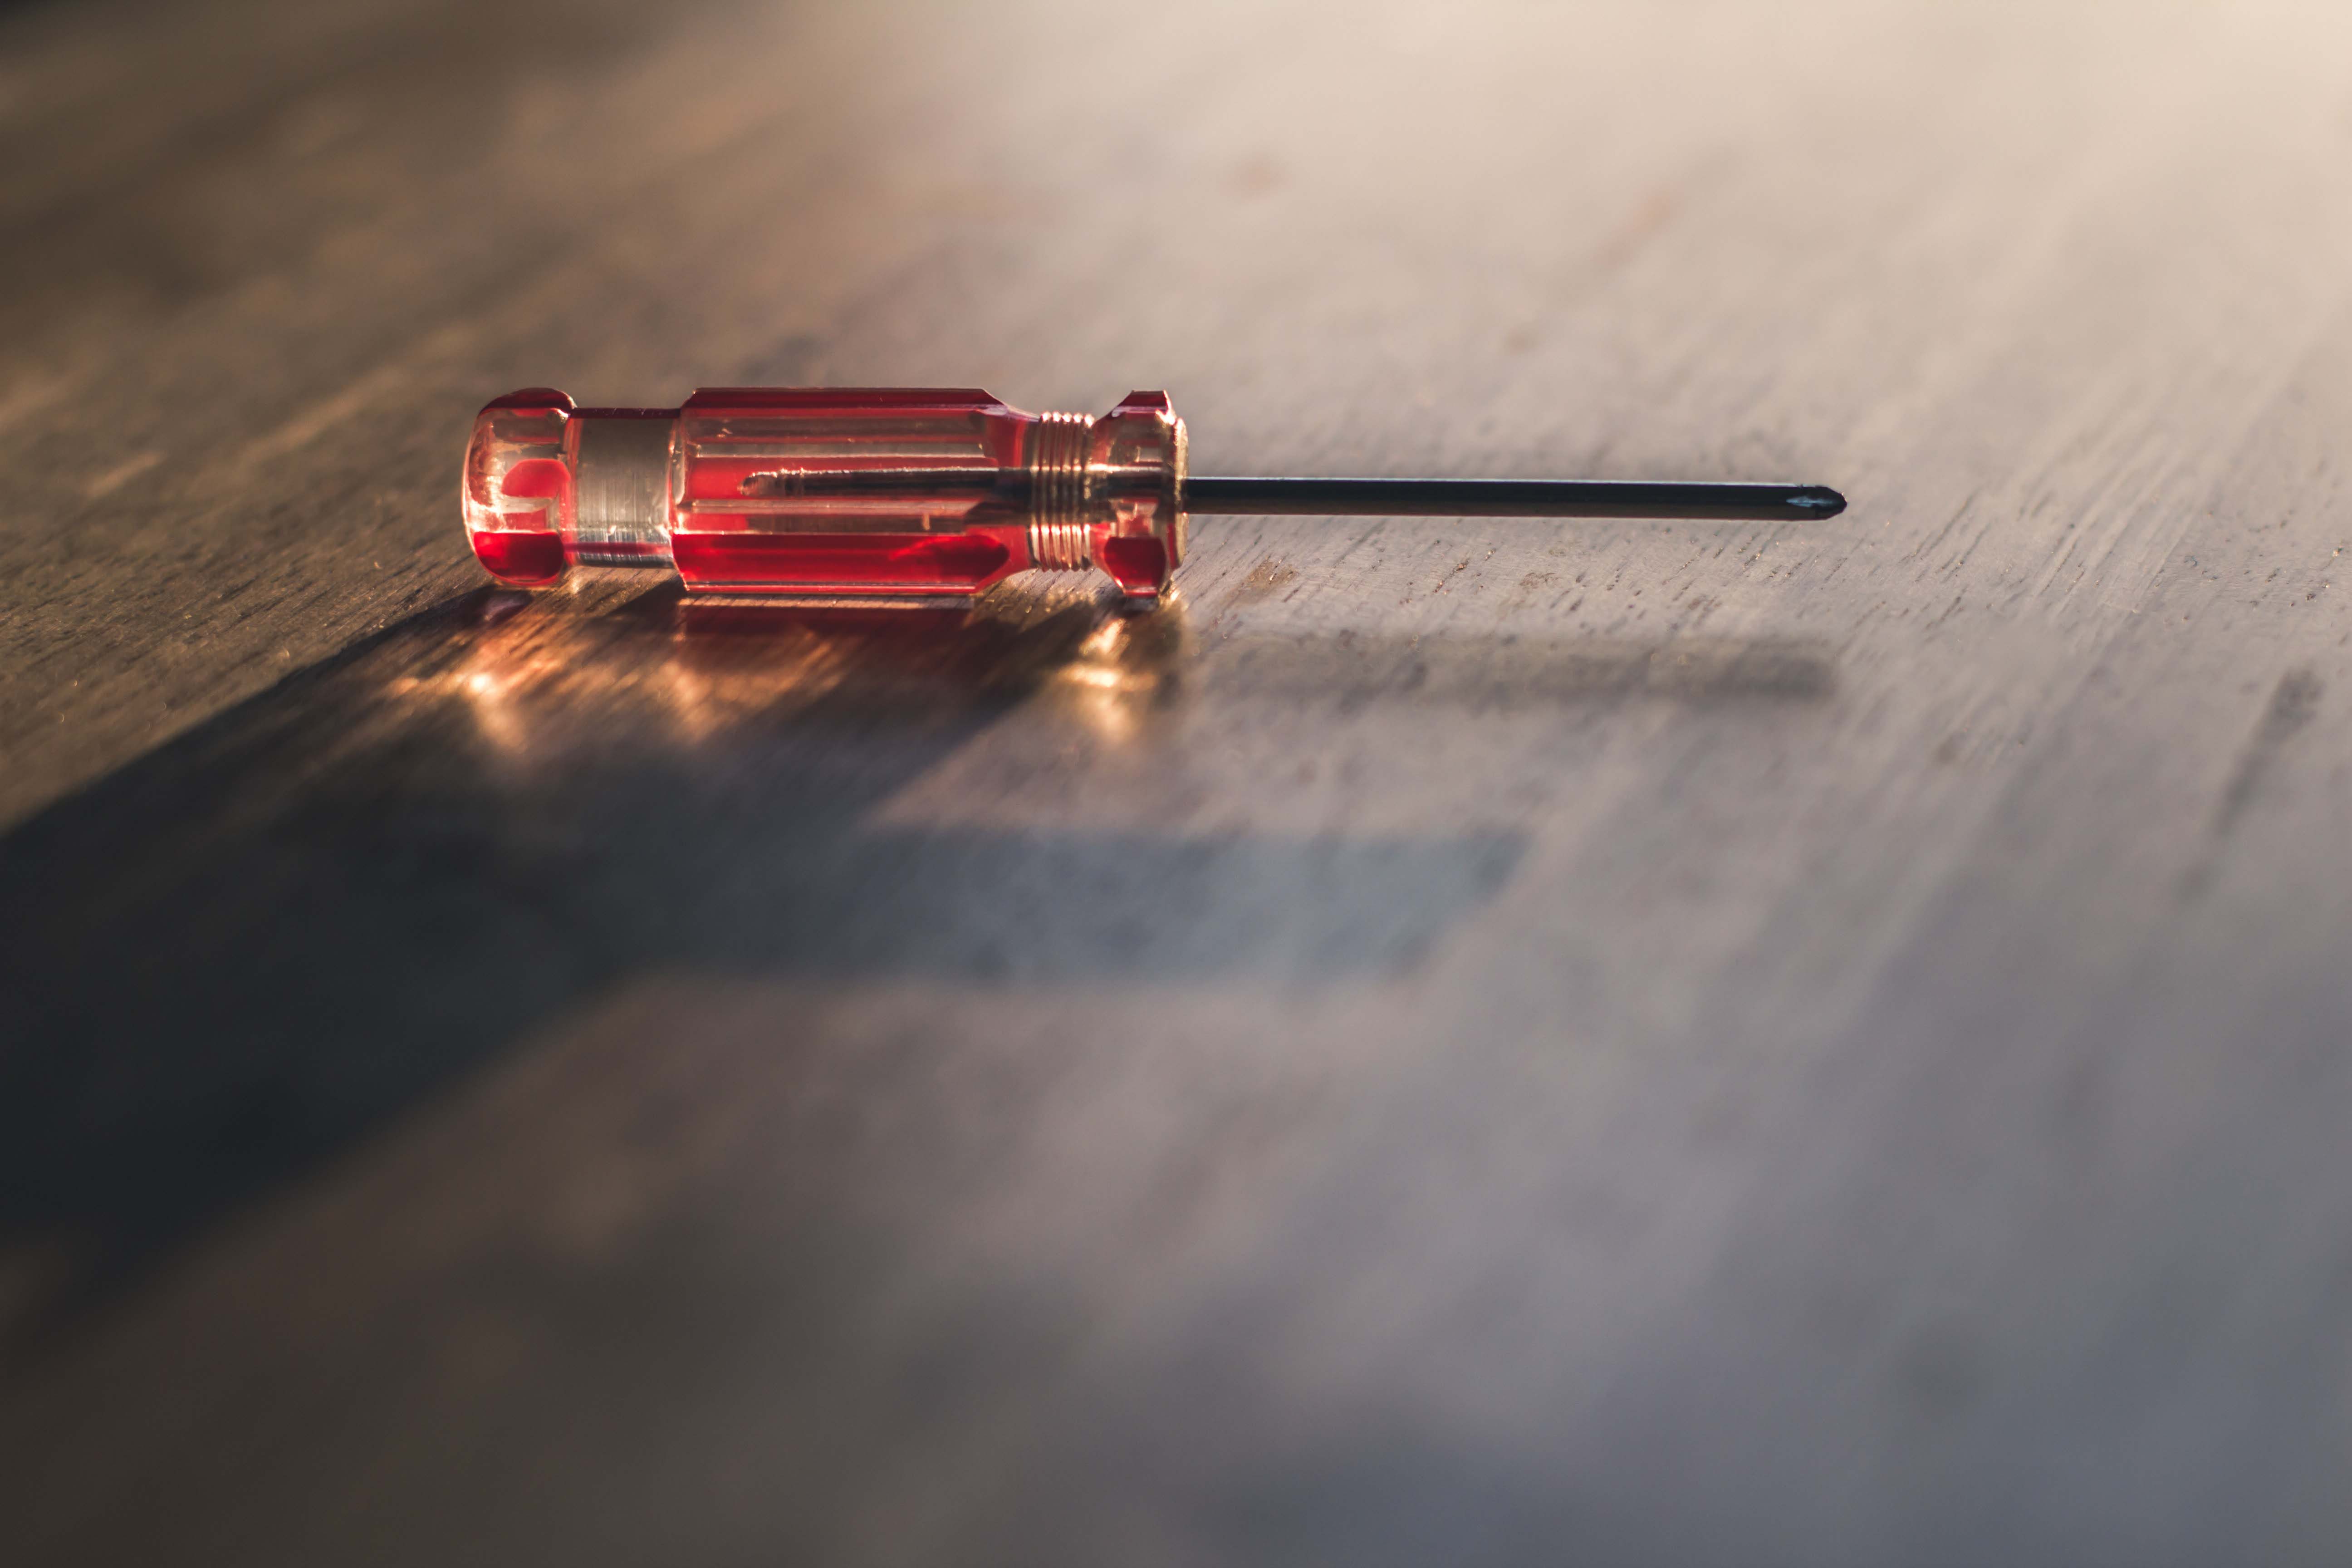 A red screwdriver on a wooden surface.